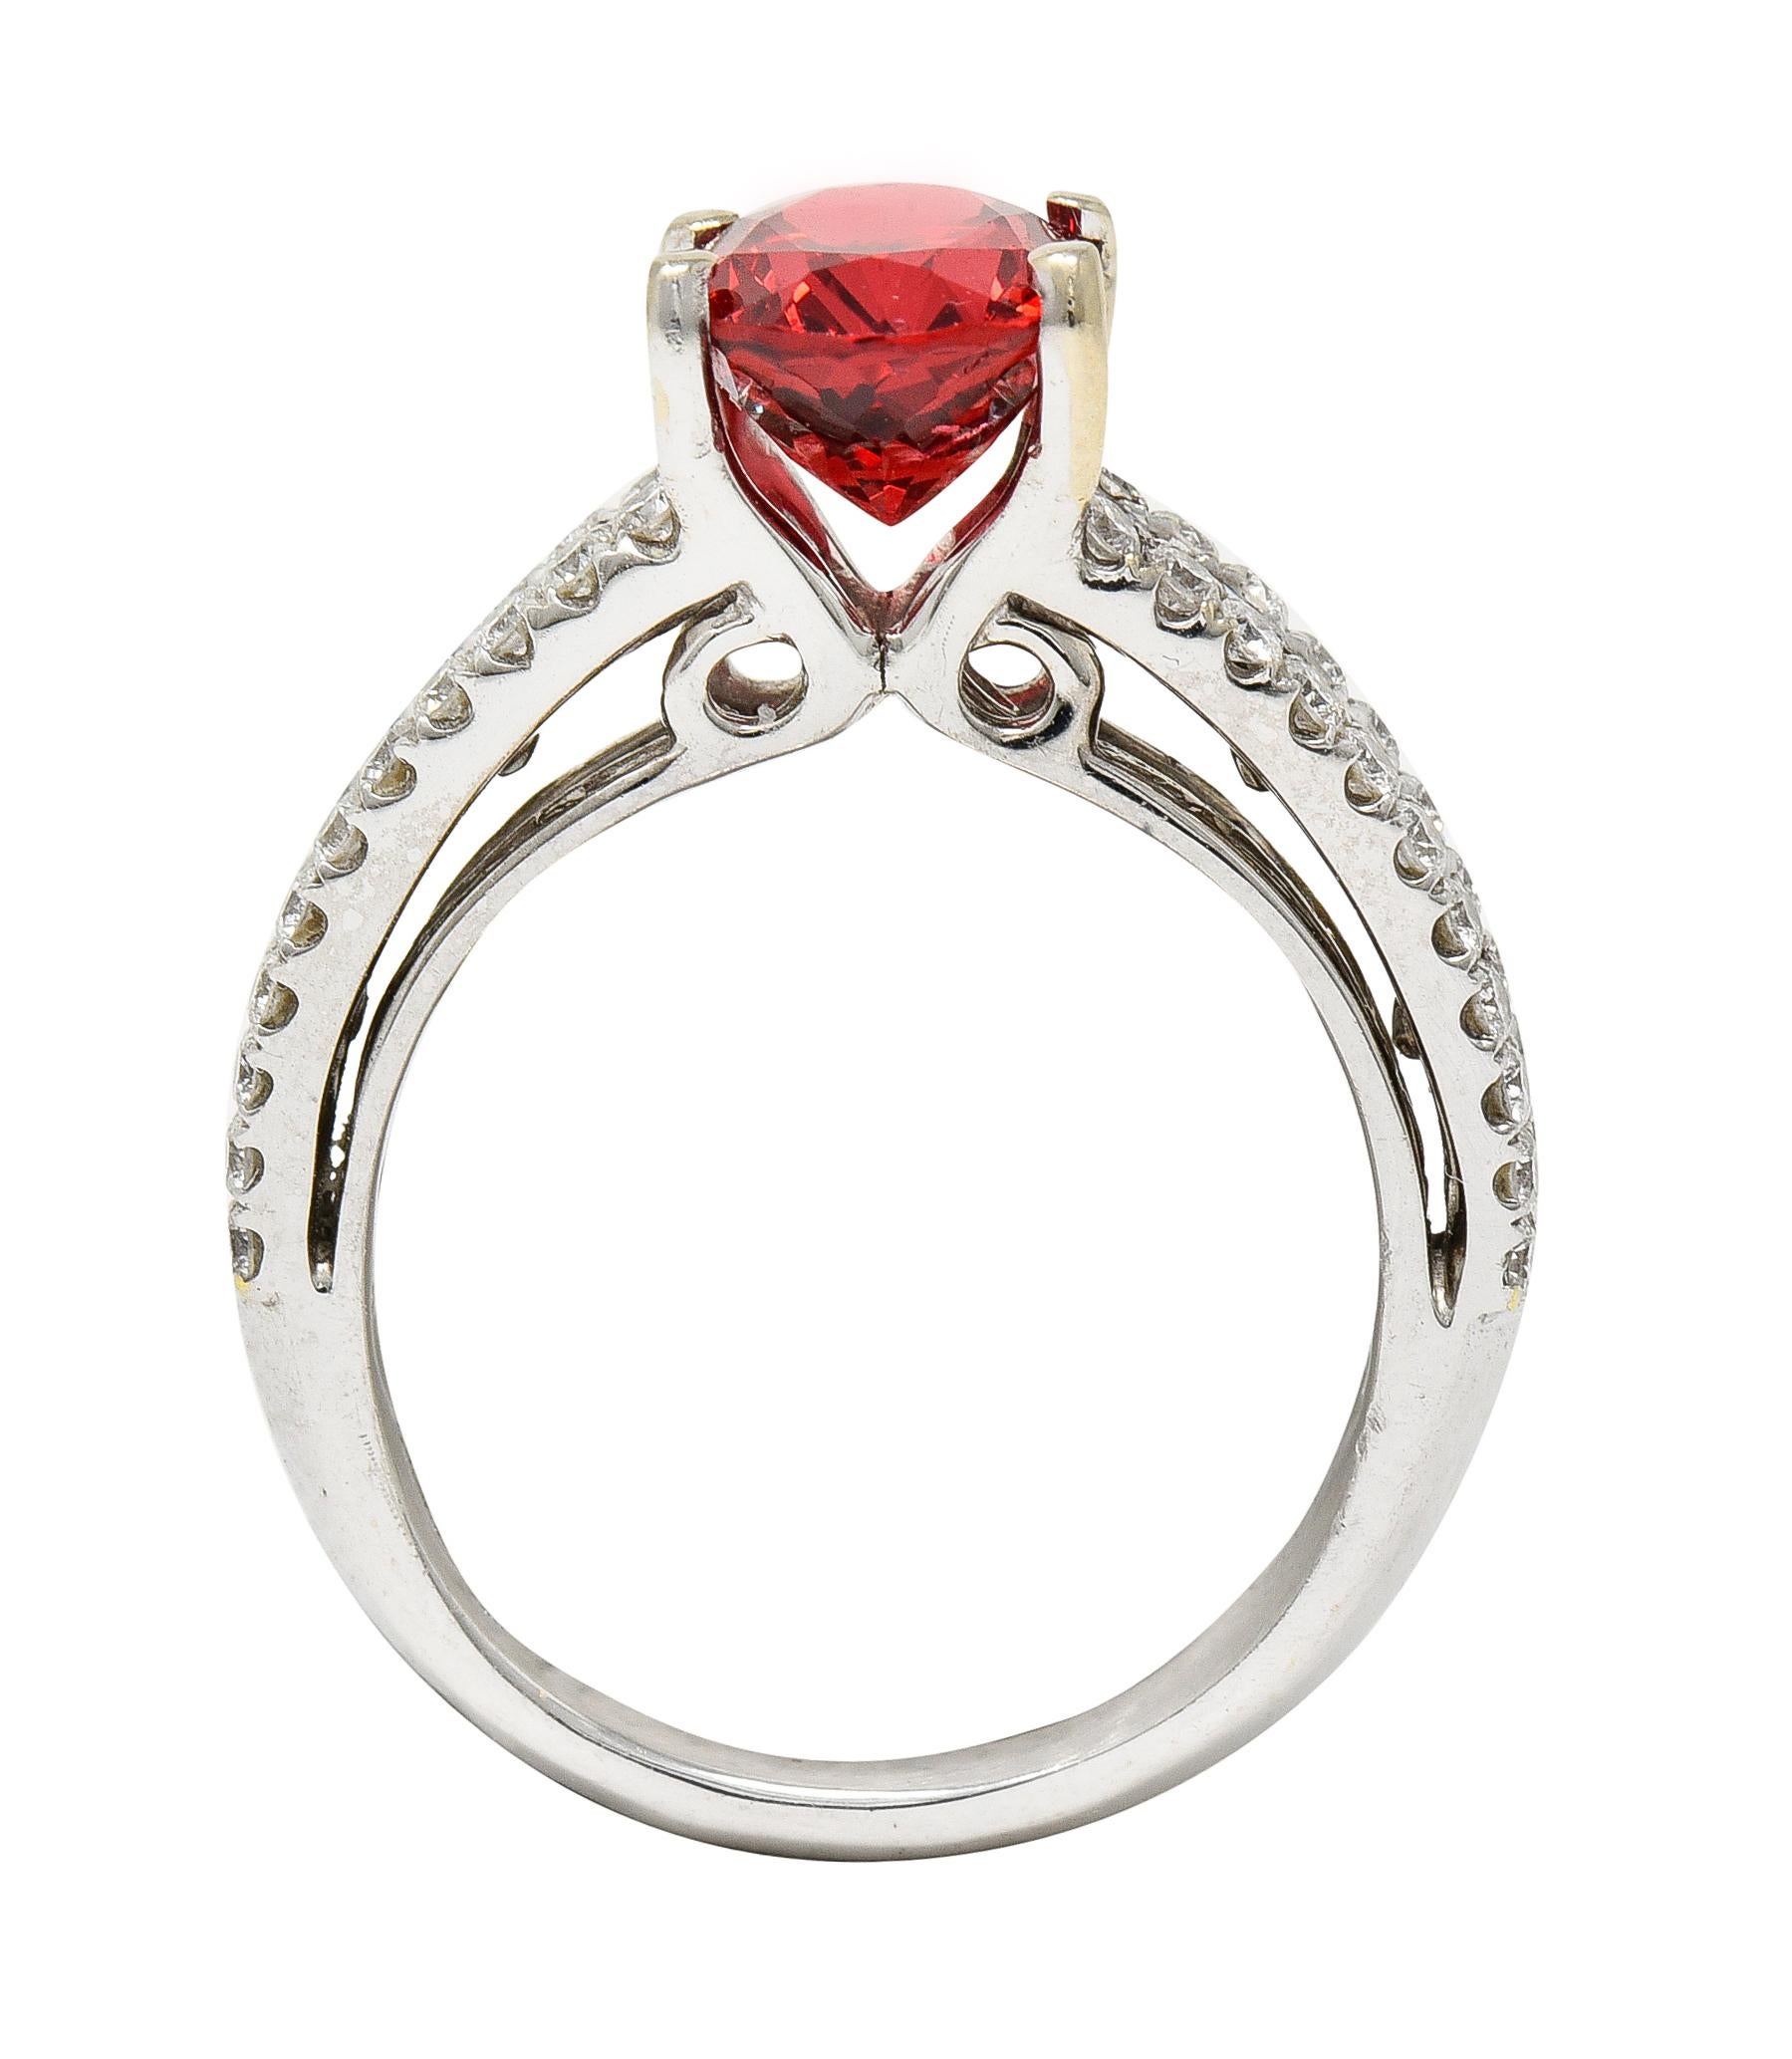 Centering an oval cut spinel weighing approximately 2.03 carats total 
Transparent bright medium orangish-red in color - prong set
Flanked by three rows of round brilliant cut diamonds
Weighing approximately 0.82 carats total
G/H color with VS2